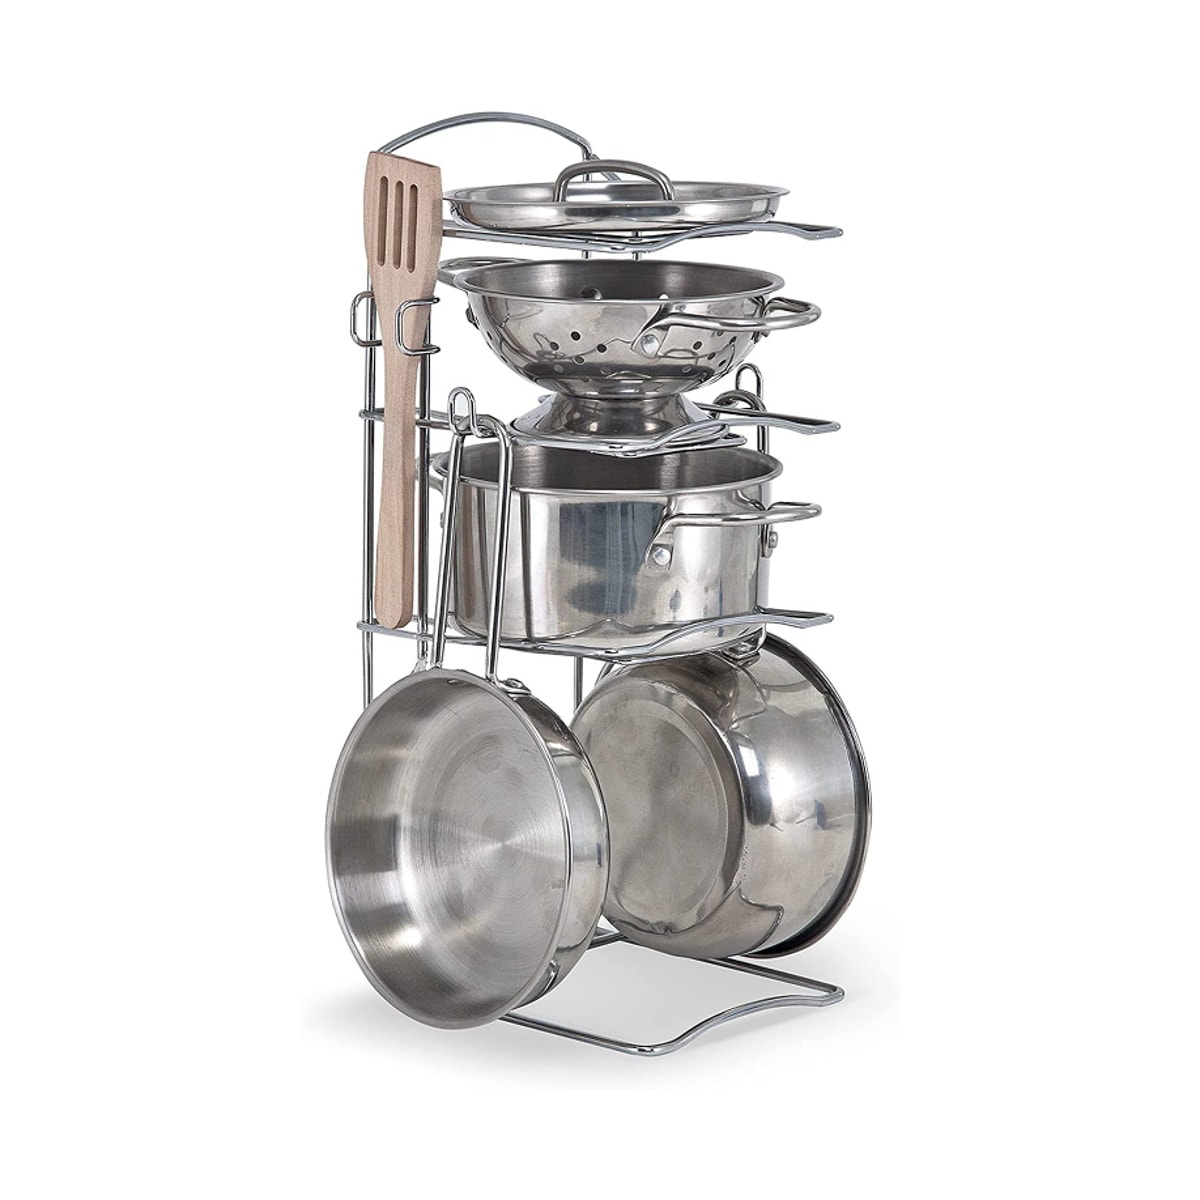 A set of kid-size stainless steel pots and pans on a rack along with a colander, lid and wooden spoon.